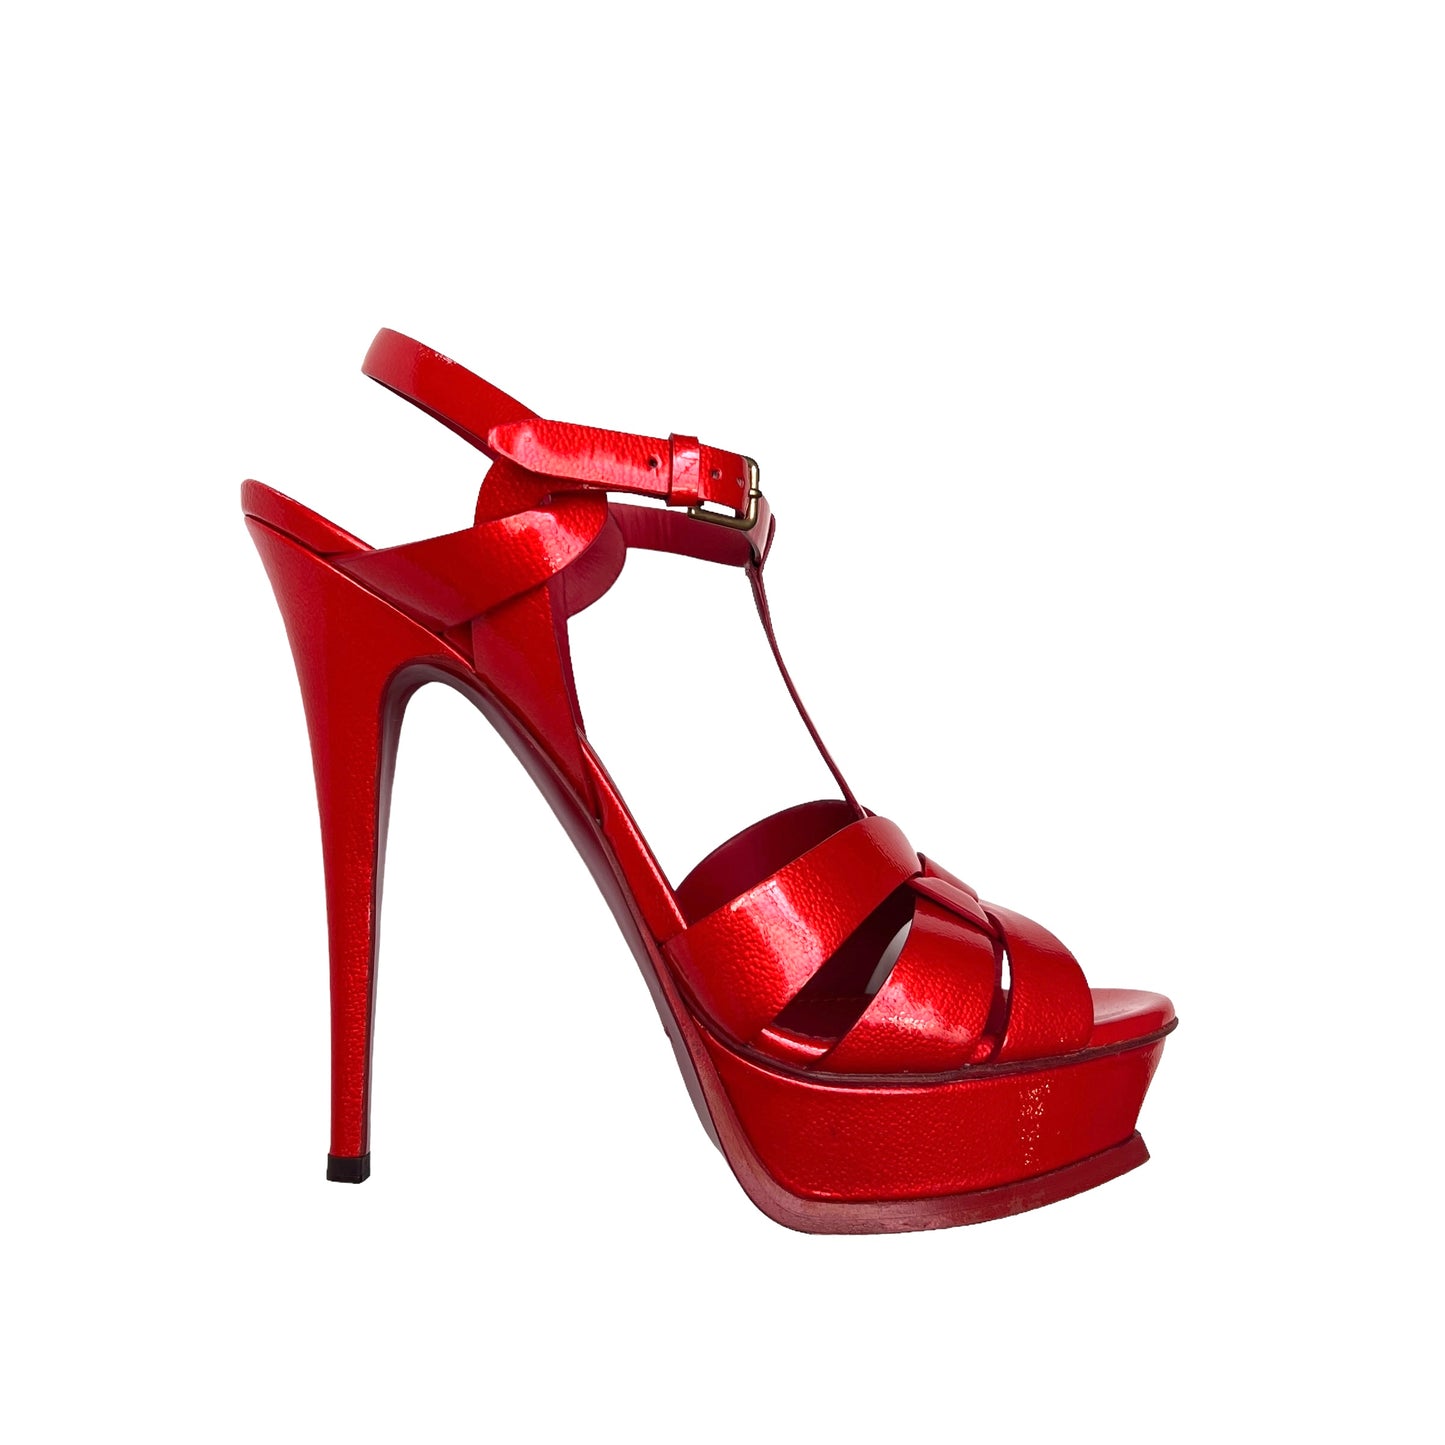 Red Patent Tribute Heels - 10.5